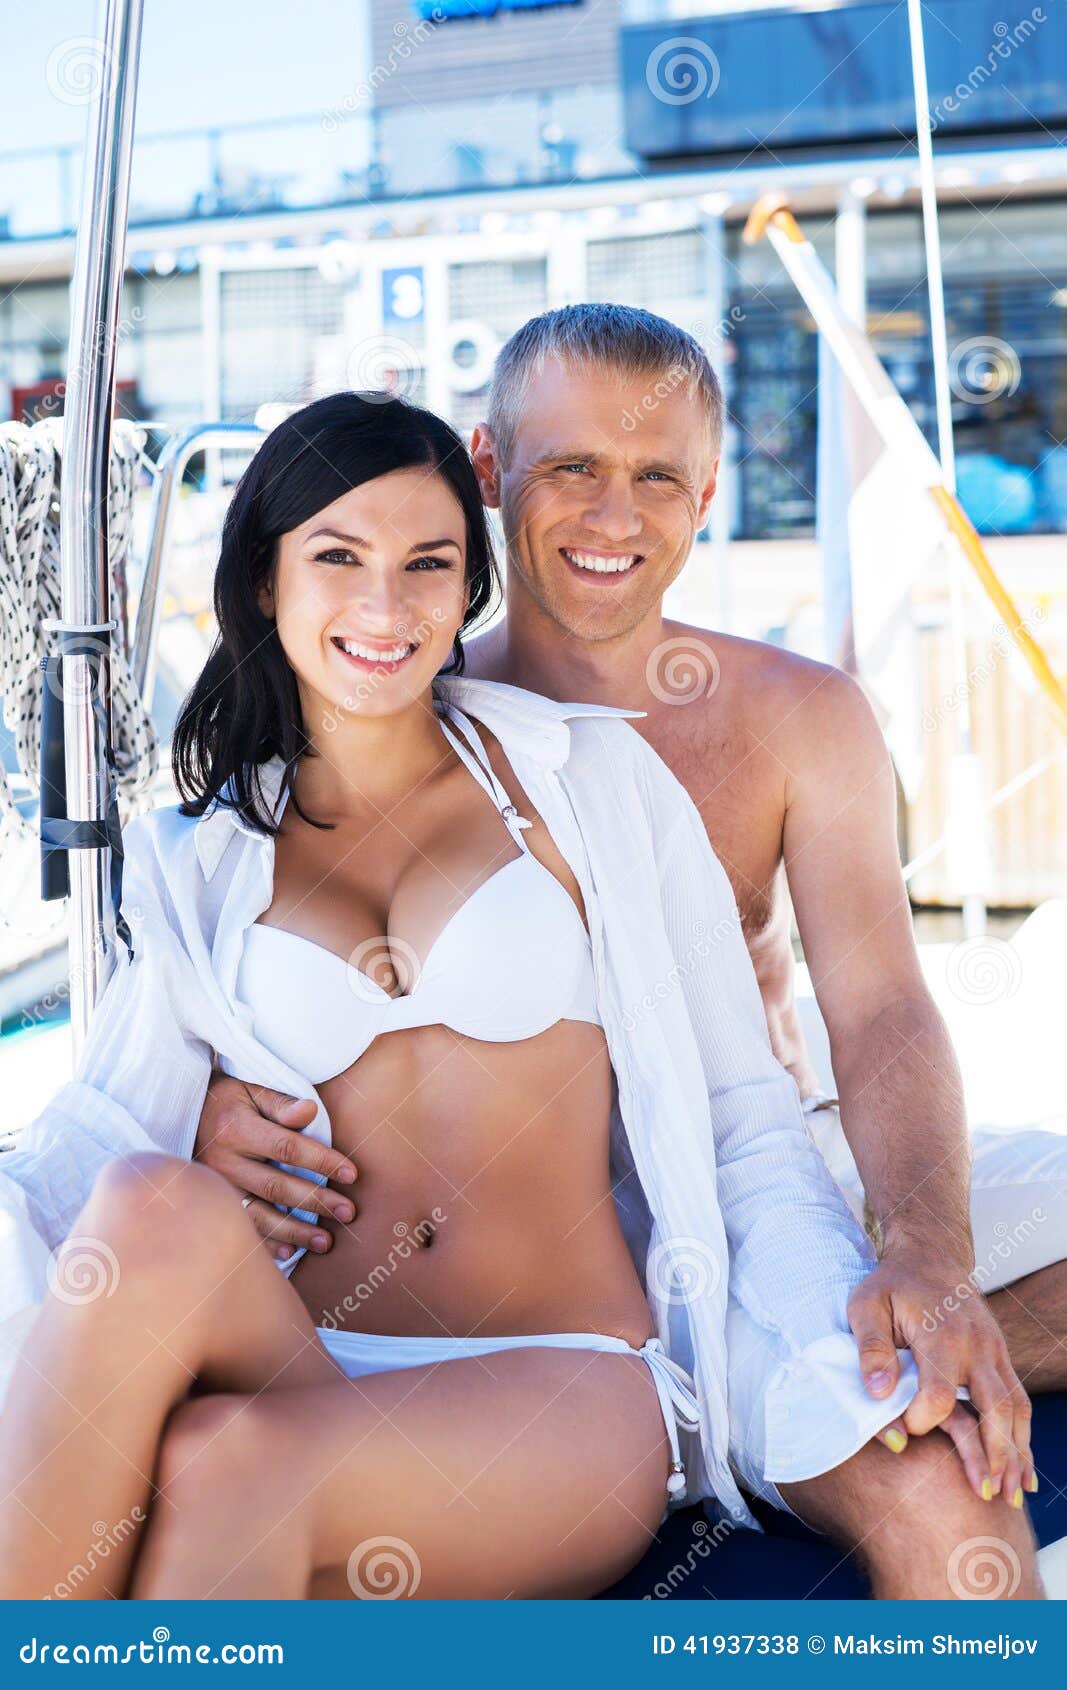 Discover the advantages of dating rich women for image picture